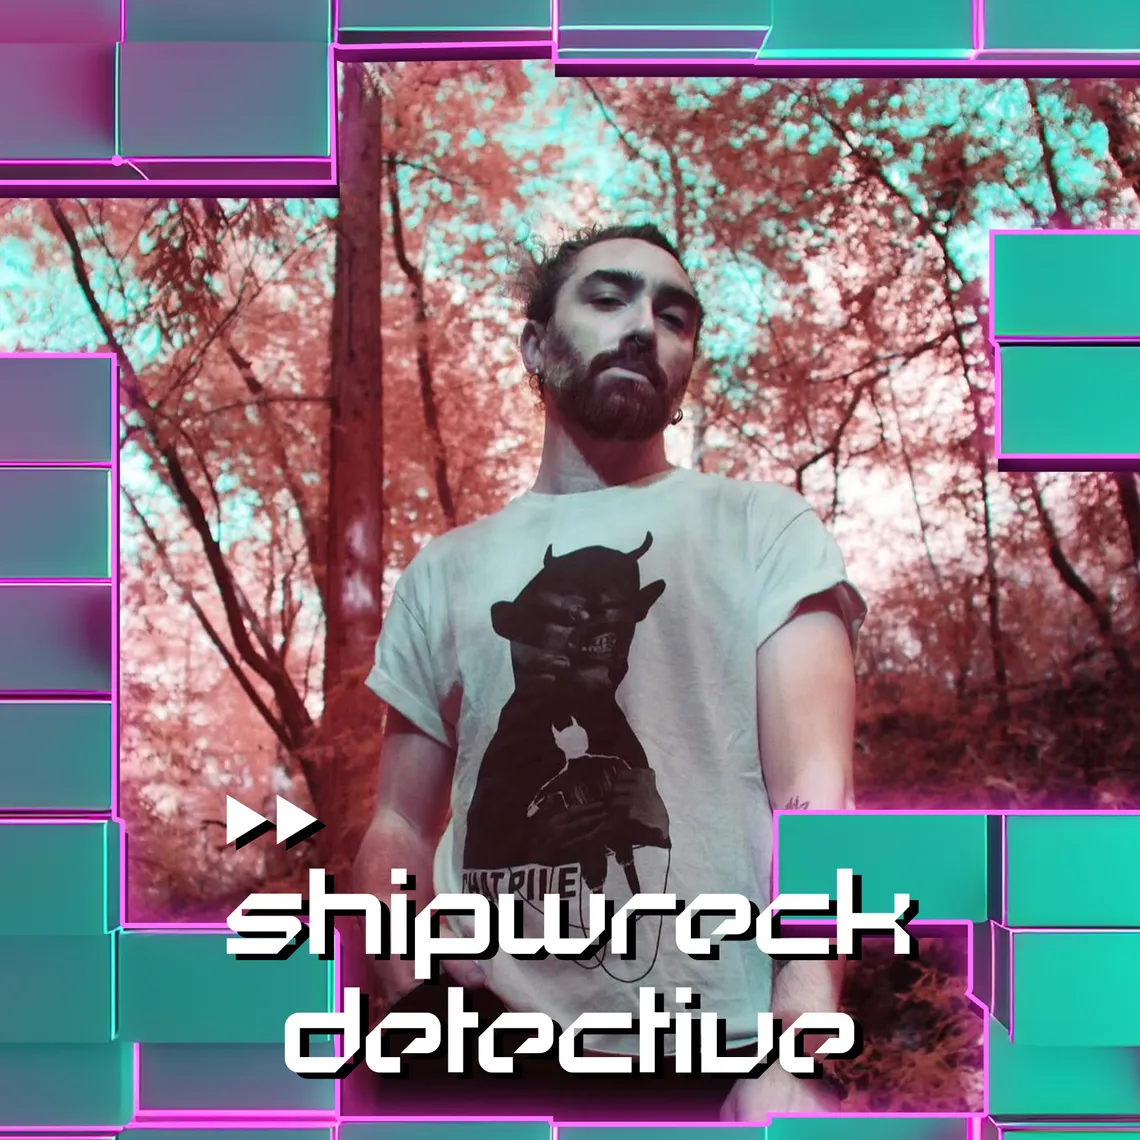 Shipwreck Detective on creating immersive music and scoring sci-fi stories